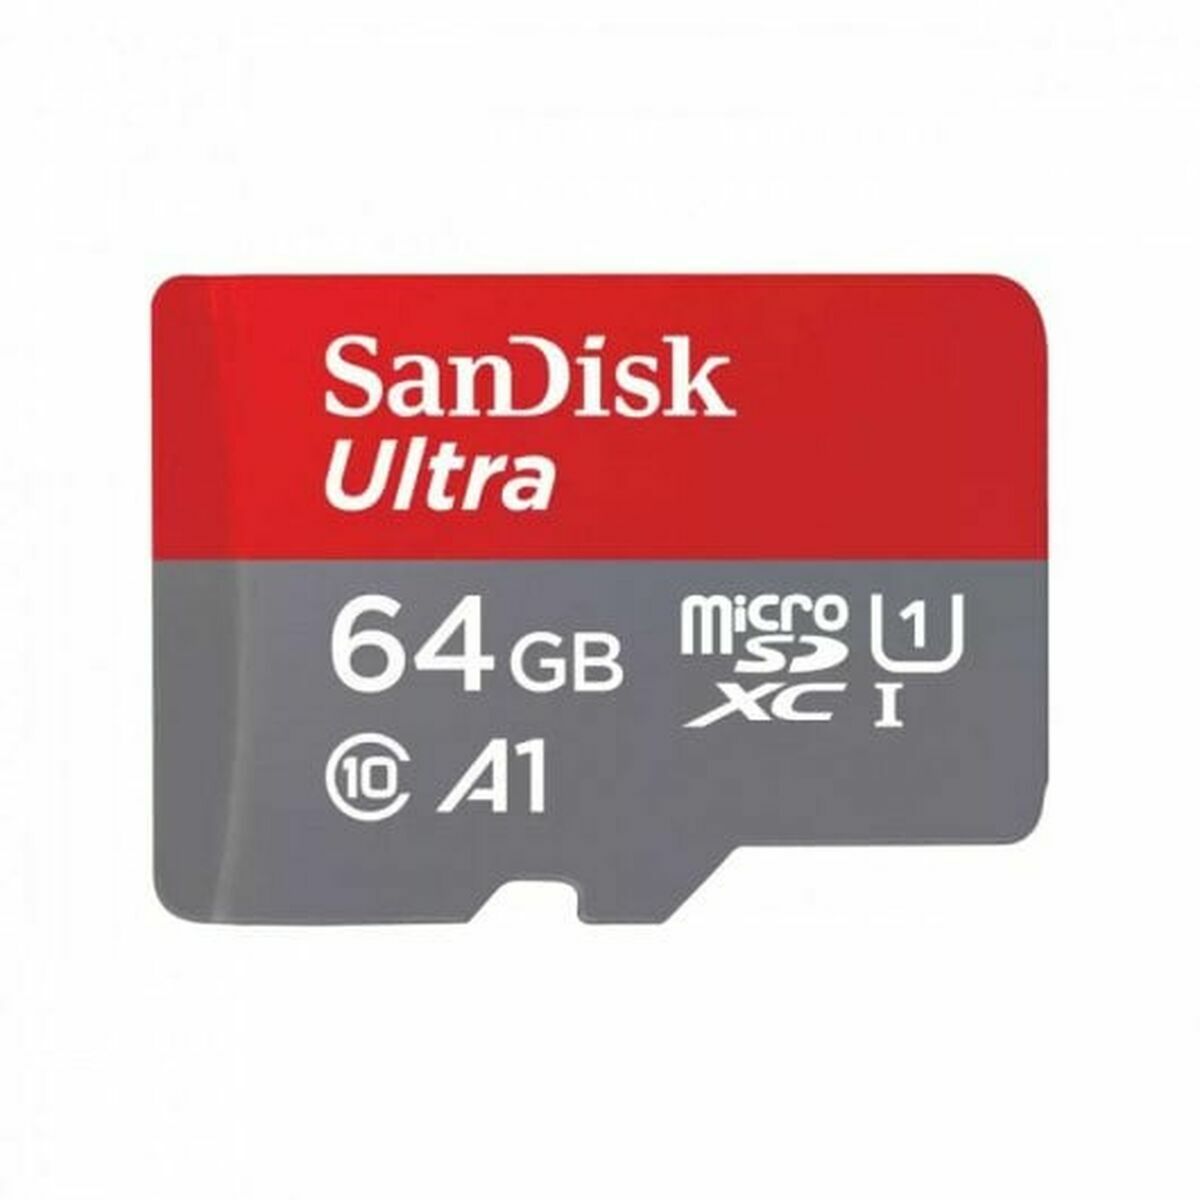 Micro SD Card SanDisk SDSQUAB-064G-GN6MA 64 GB, SanDisk, Computing, Data storage, micro-sd-card-sandisk-sdsquab-064g-gn6ma-64-gb, Brand_SanDisk, category-reference-2609, category-reference-2803, category-reference-2813, category-reference-t-19685, category-reference-t-19909, category-reference-t-21355, category-reference-t-25632, category-reference-t-29820, computers / components, Condition_NEW, Price_20 - 50, Teleworking, RiotNook